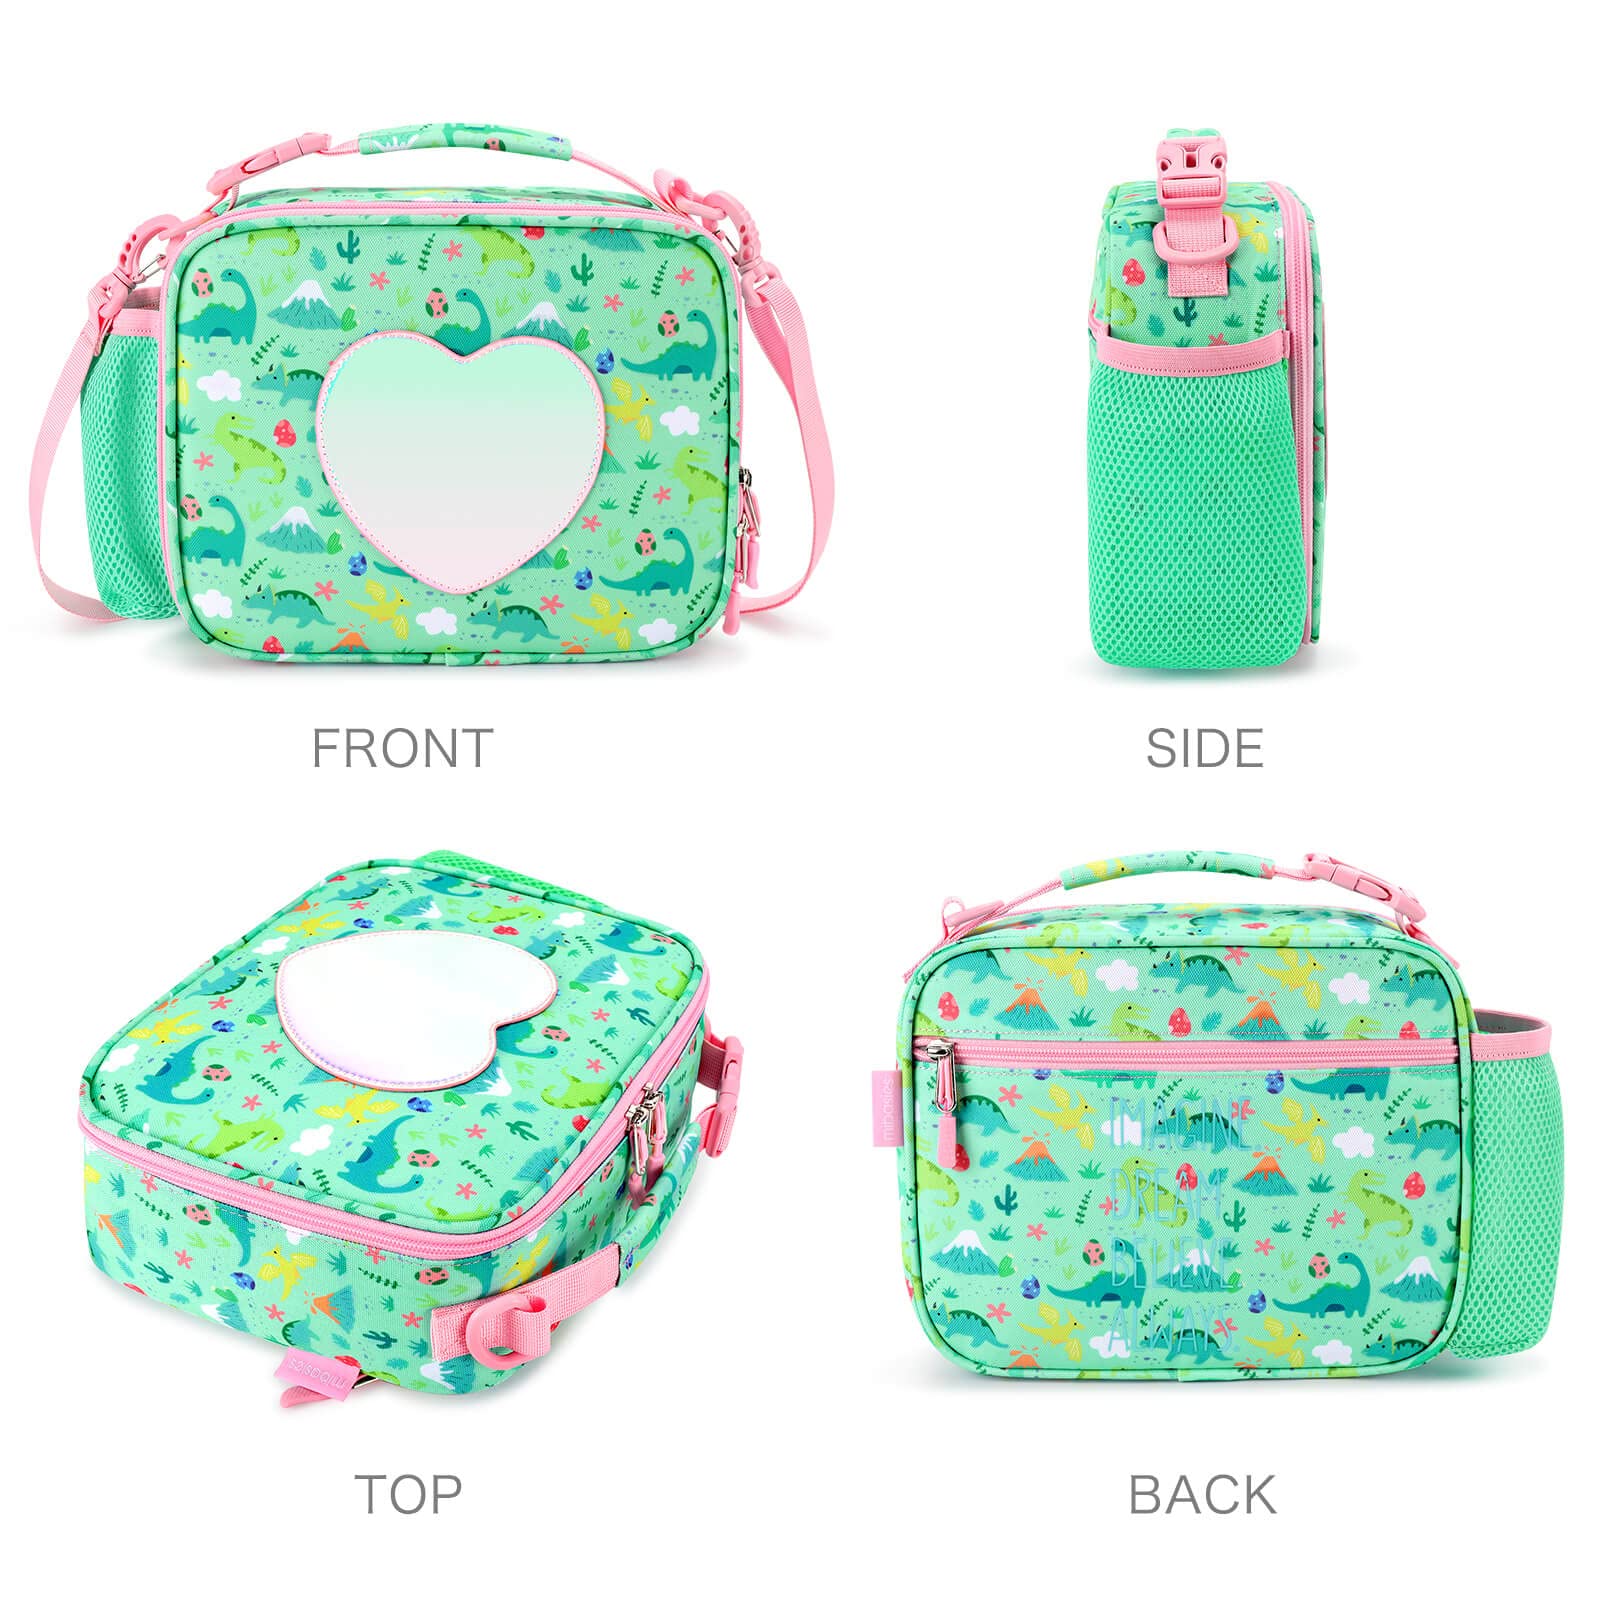  mibasies Girls Lunch Bag for Kids Insulated Lunch Box